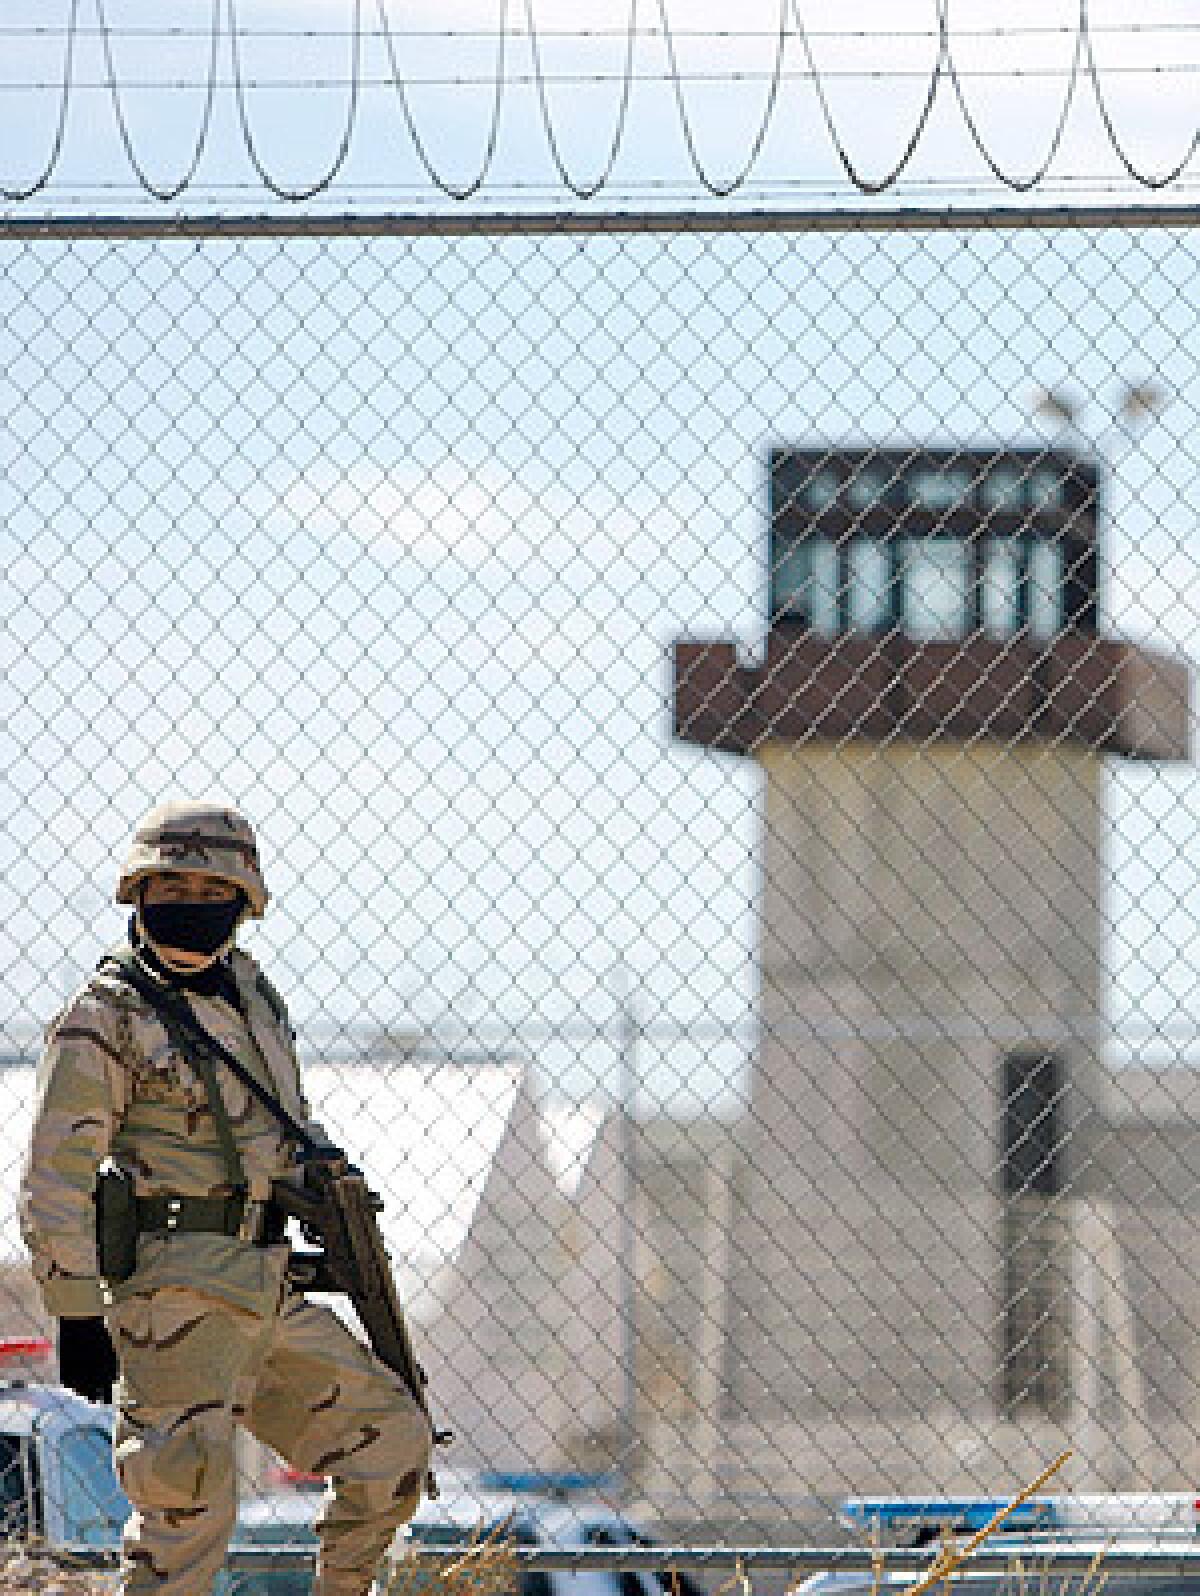 A soldier stands guard at the prison in Ciudad Juarez during the riot. The violence comes as the ravaged city is being placed under military control